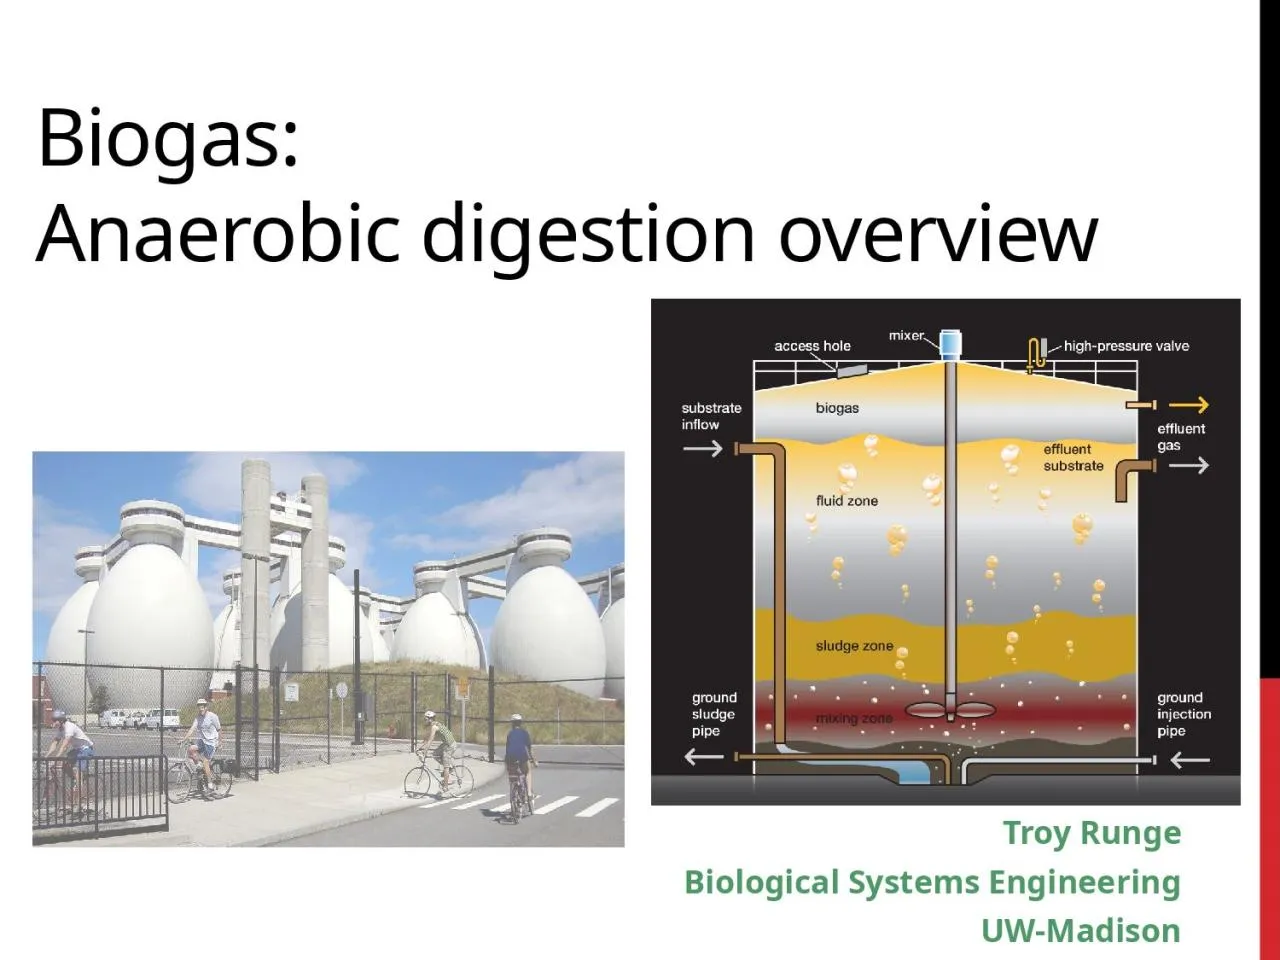 Biogas: Anaerobic digestion overview